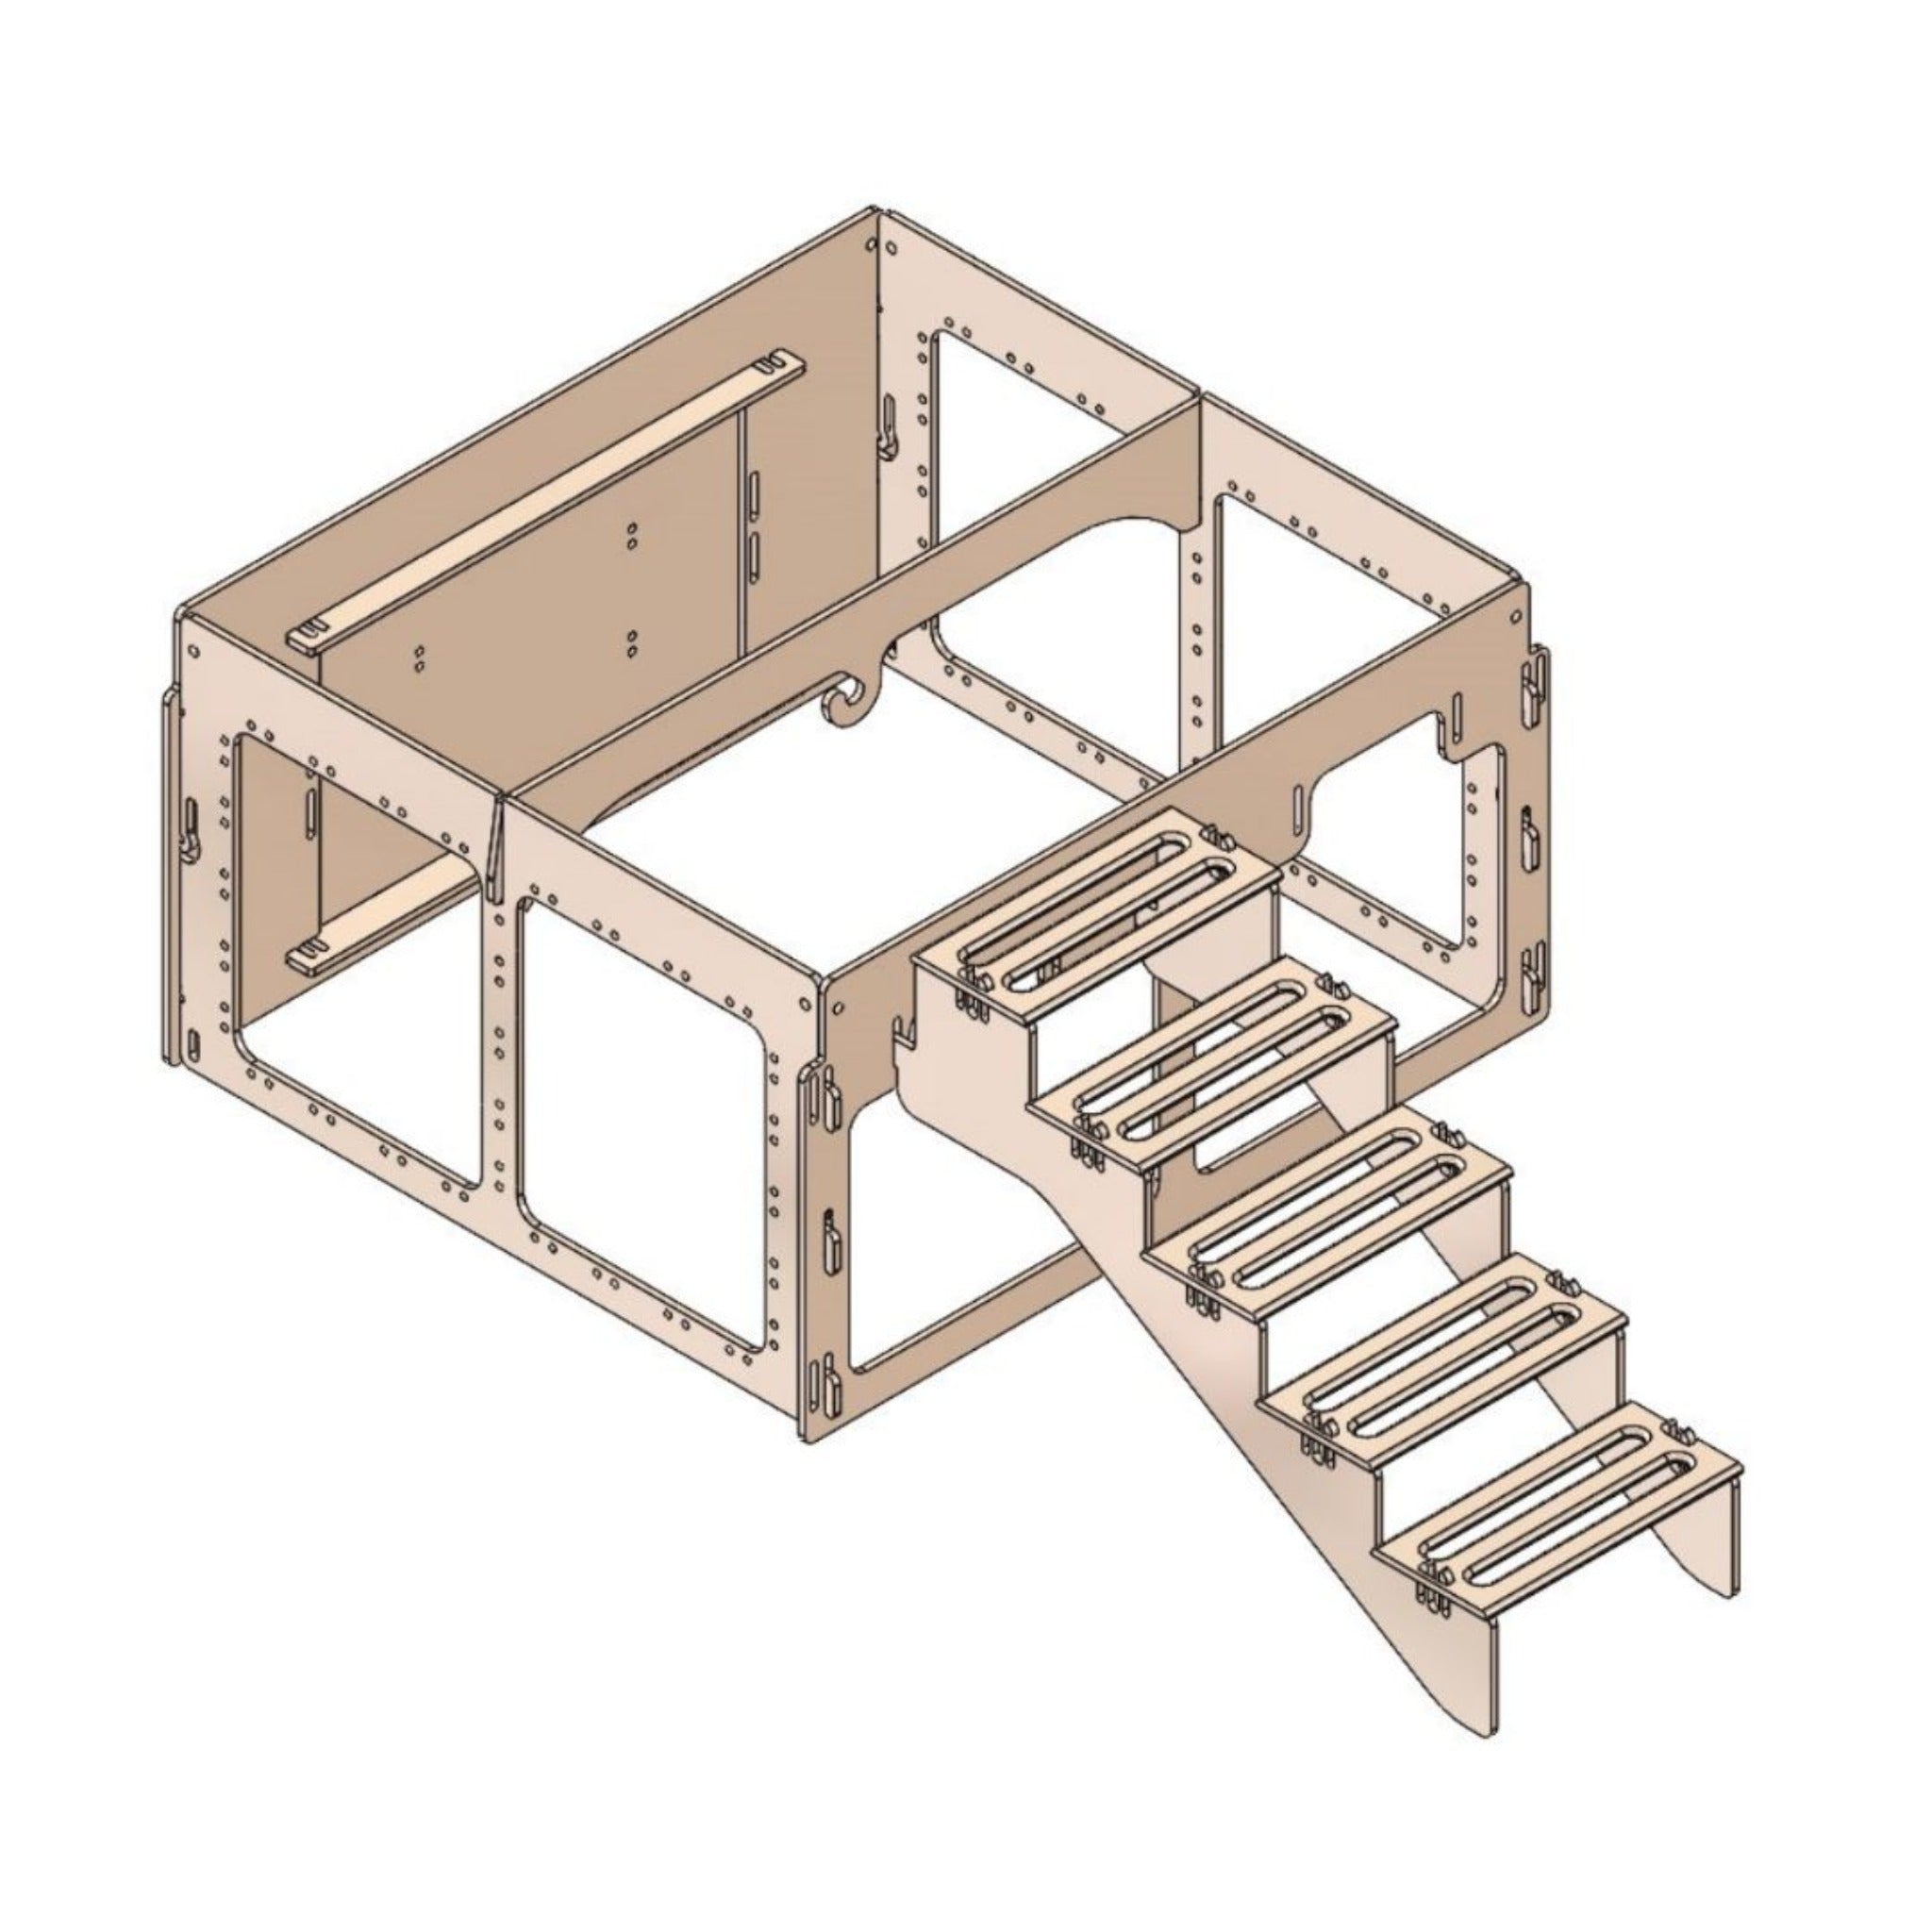 Coop stand and stairs for Formex Chicken coop. Fits both Standard and Large chicken coops. 3D rendering